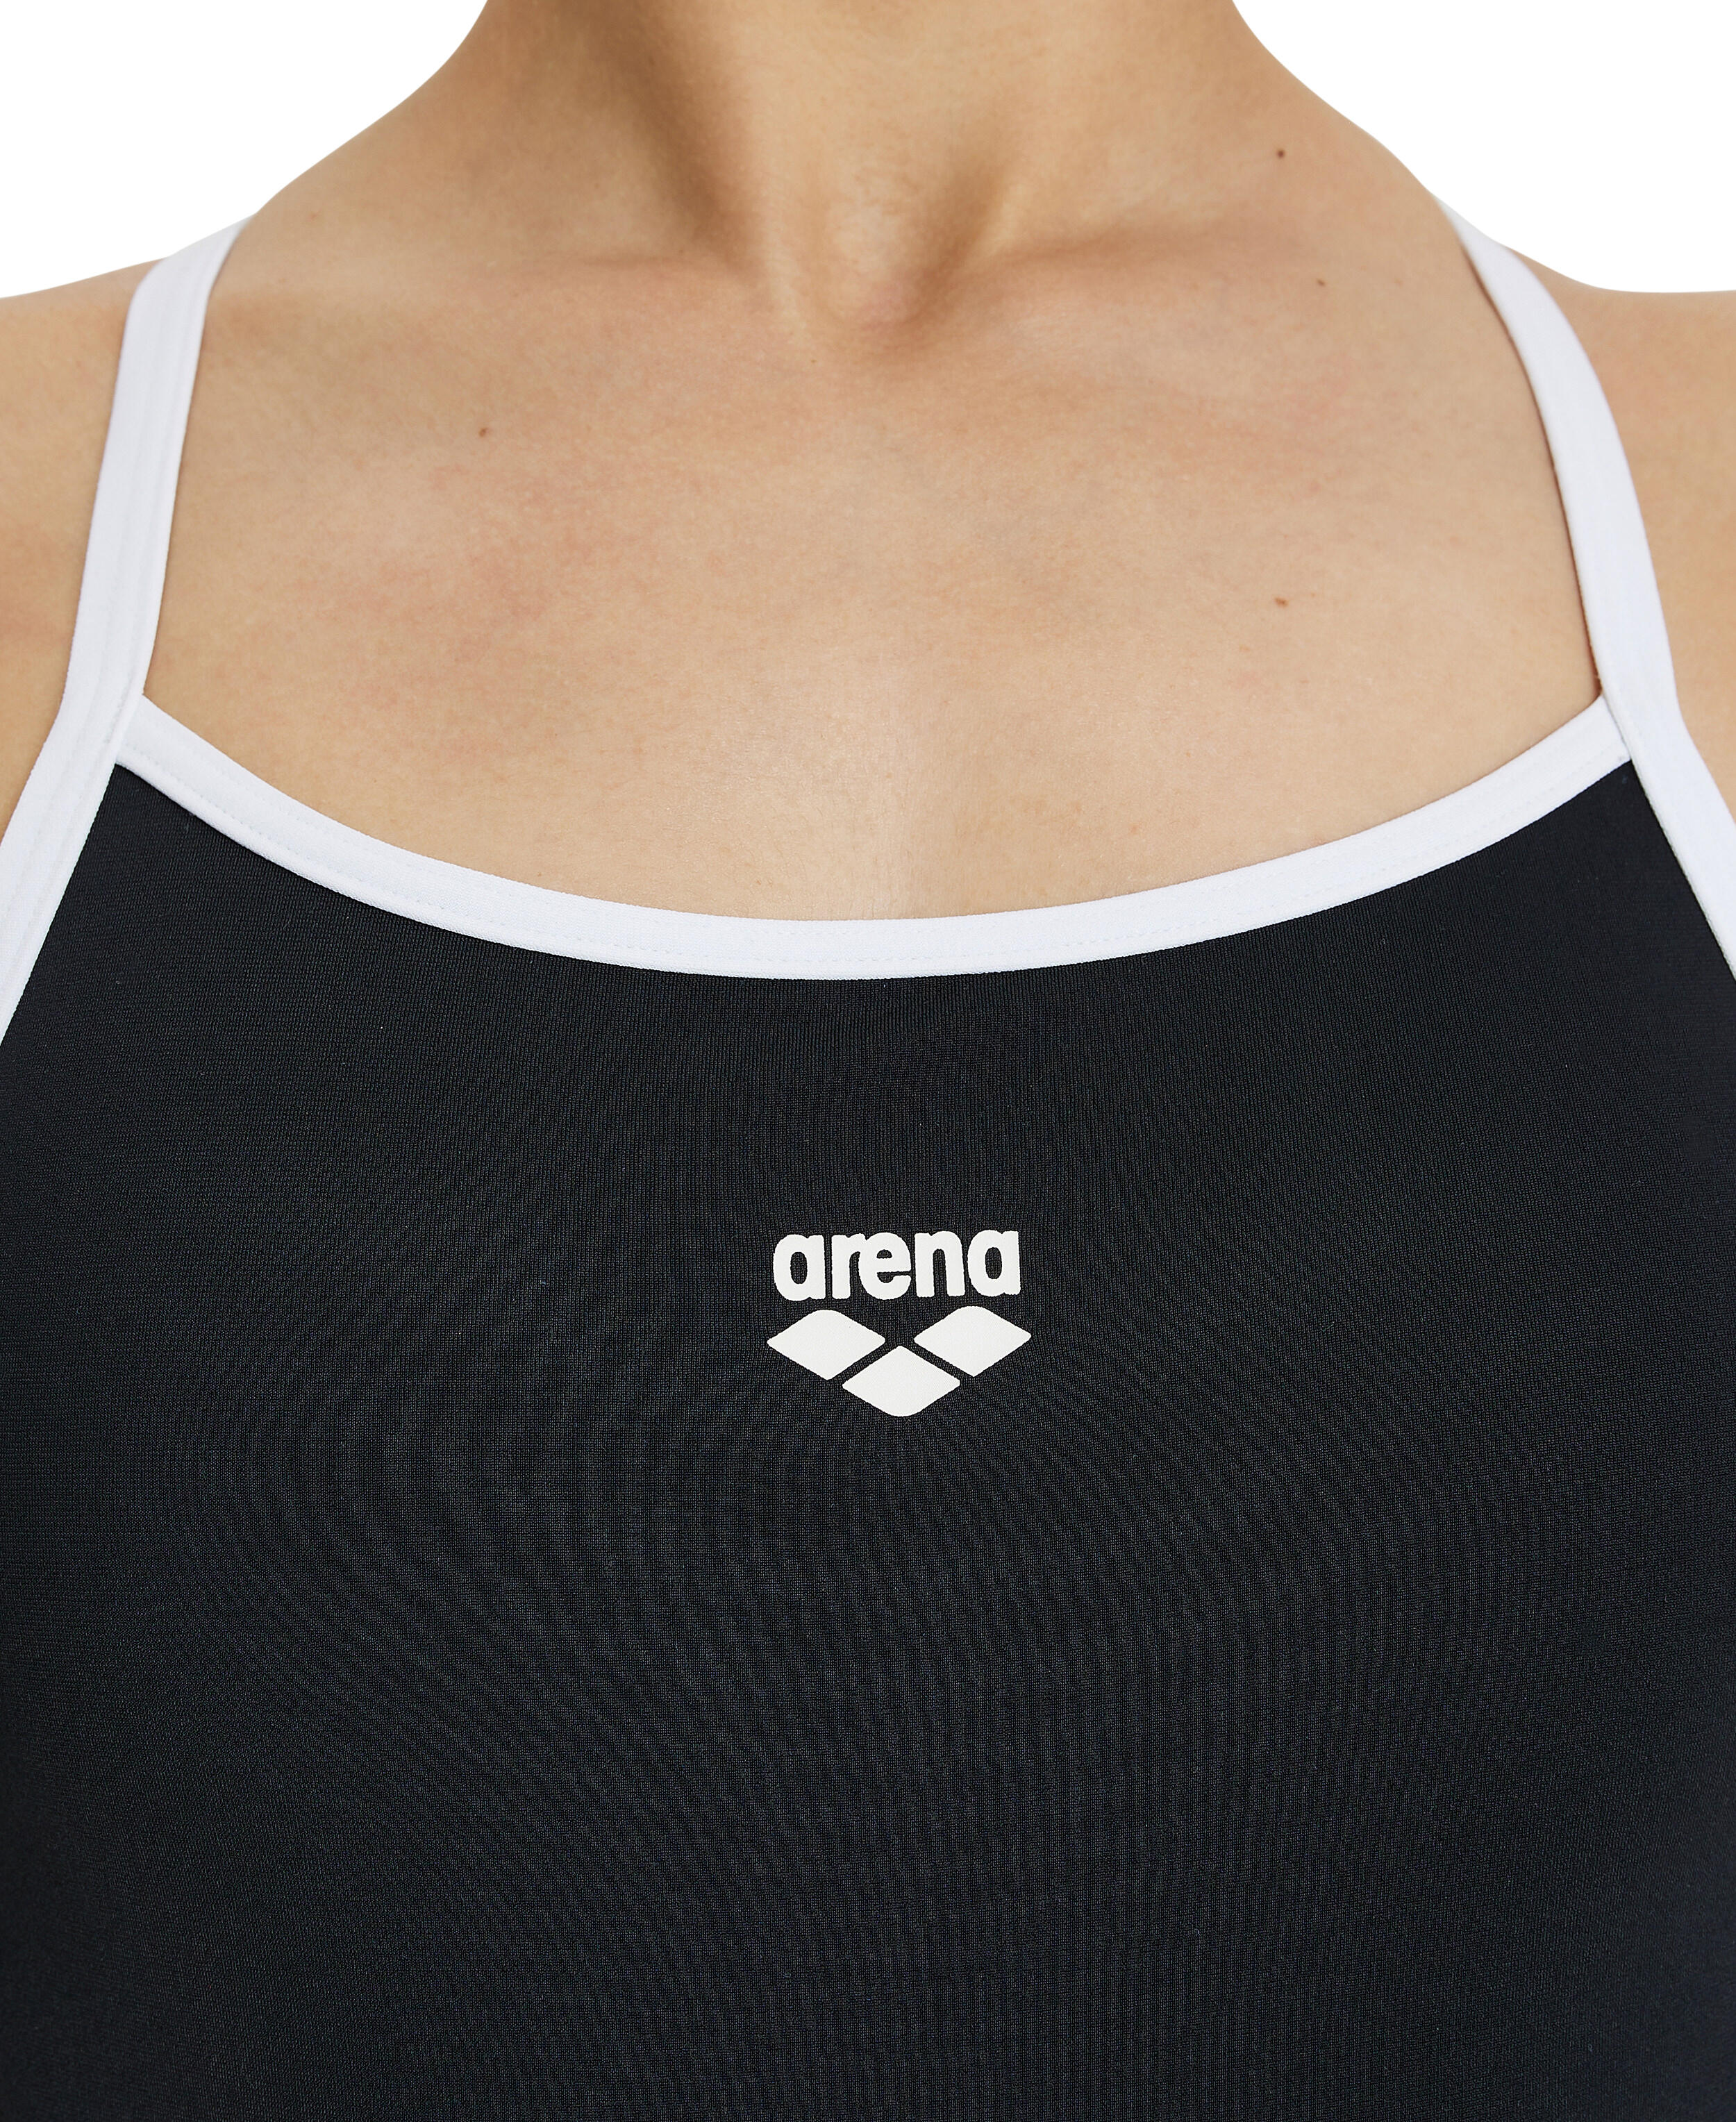 Arena Women's Icons Superfly Back Swimsuit - Black/ White 4/5